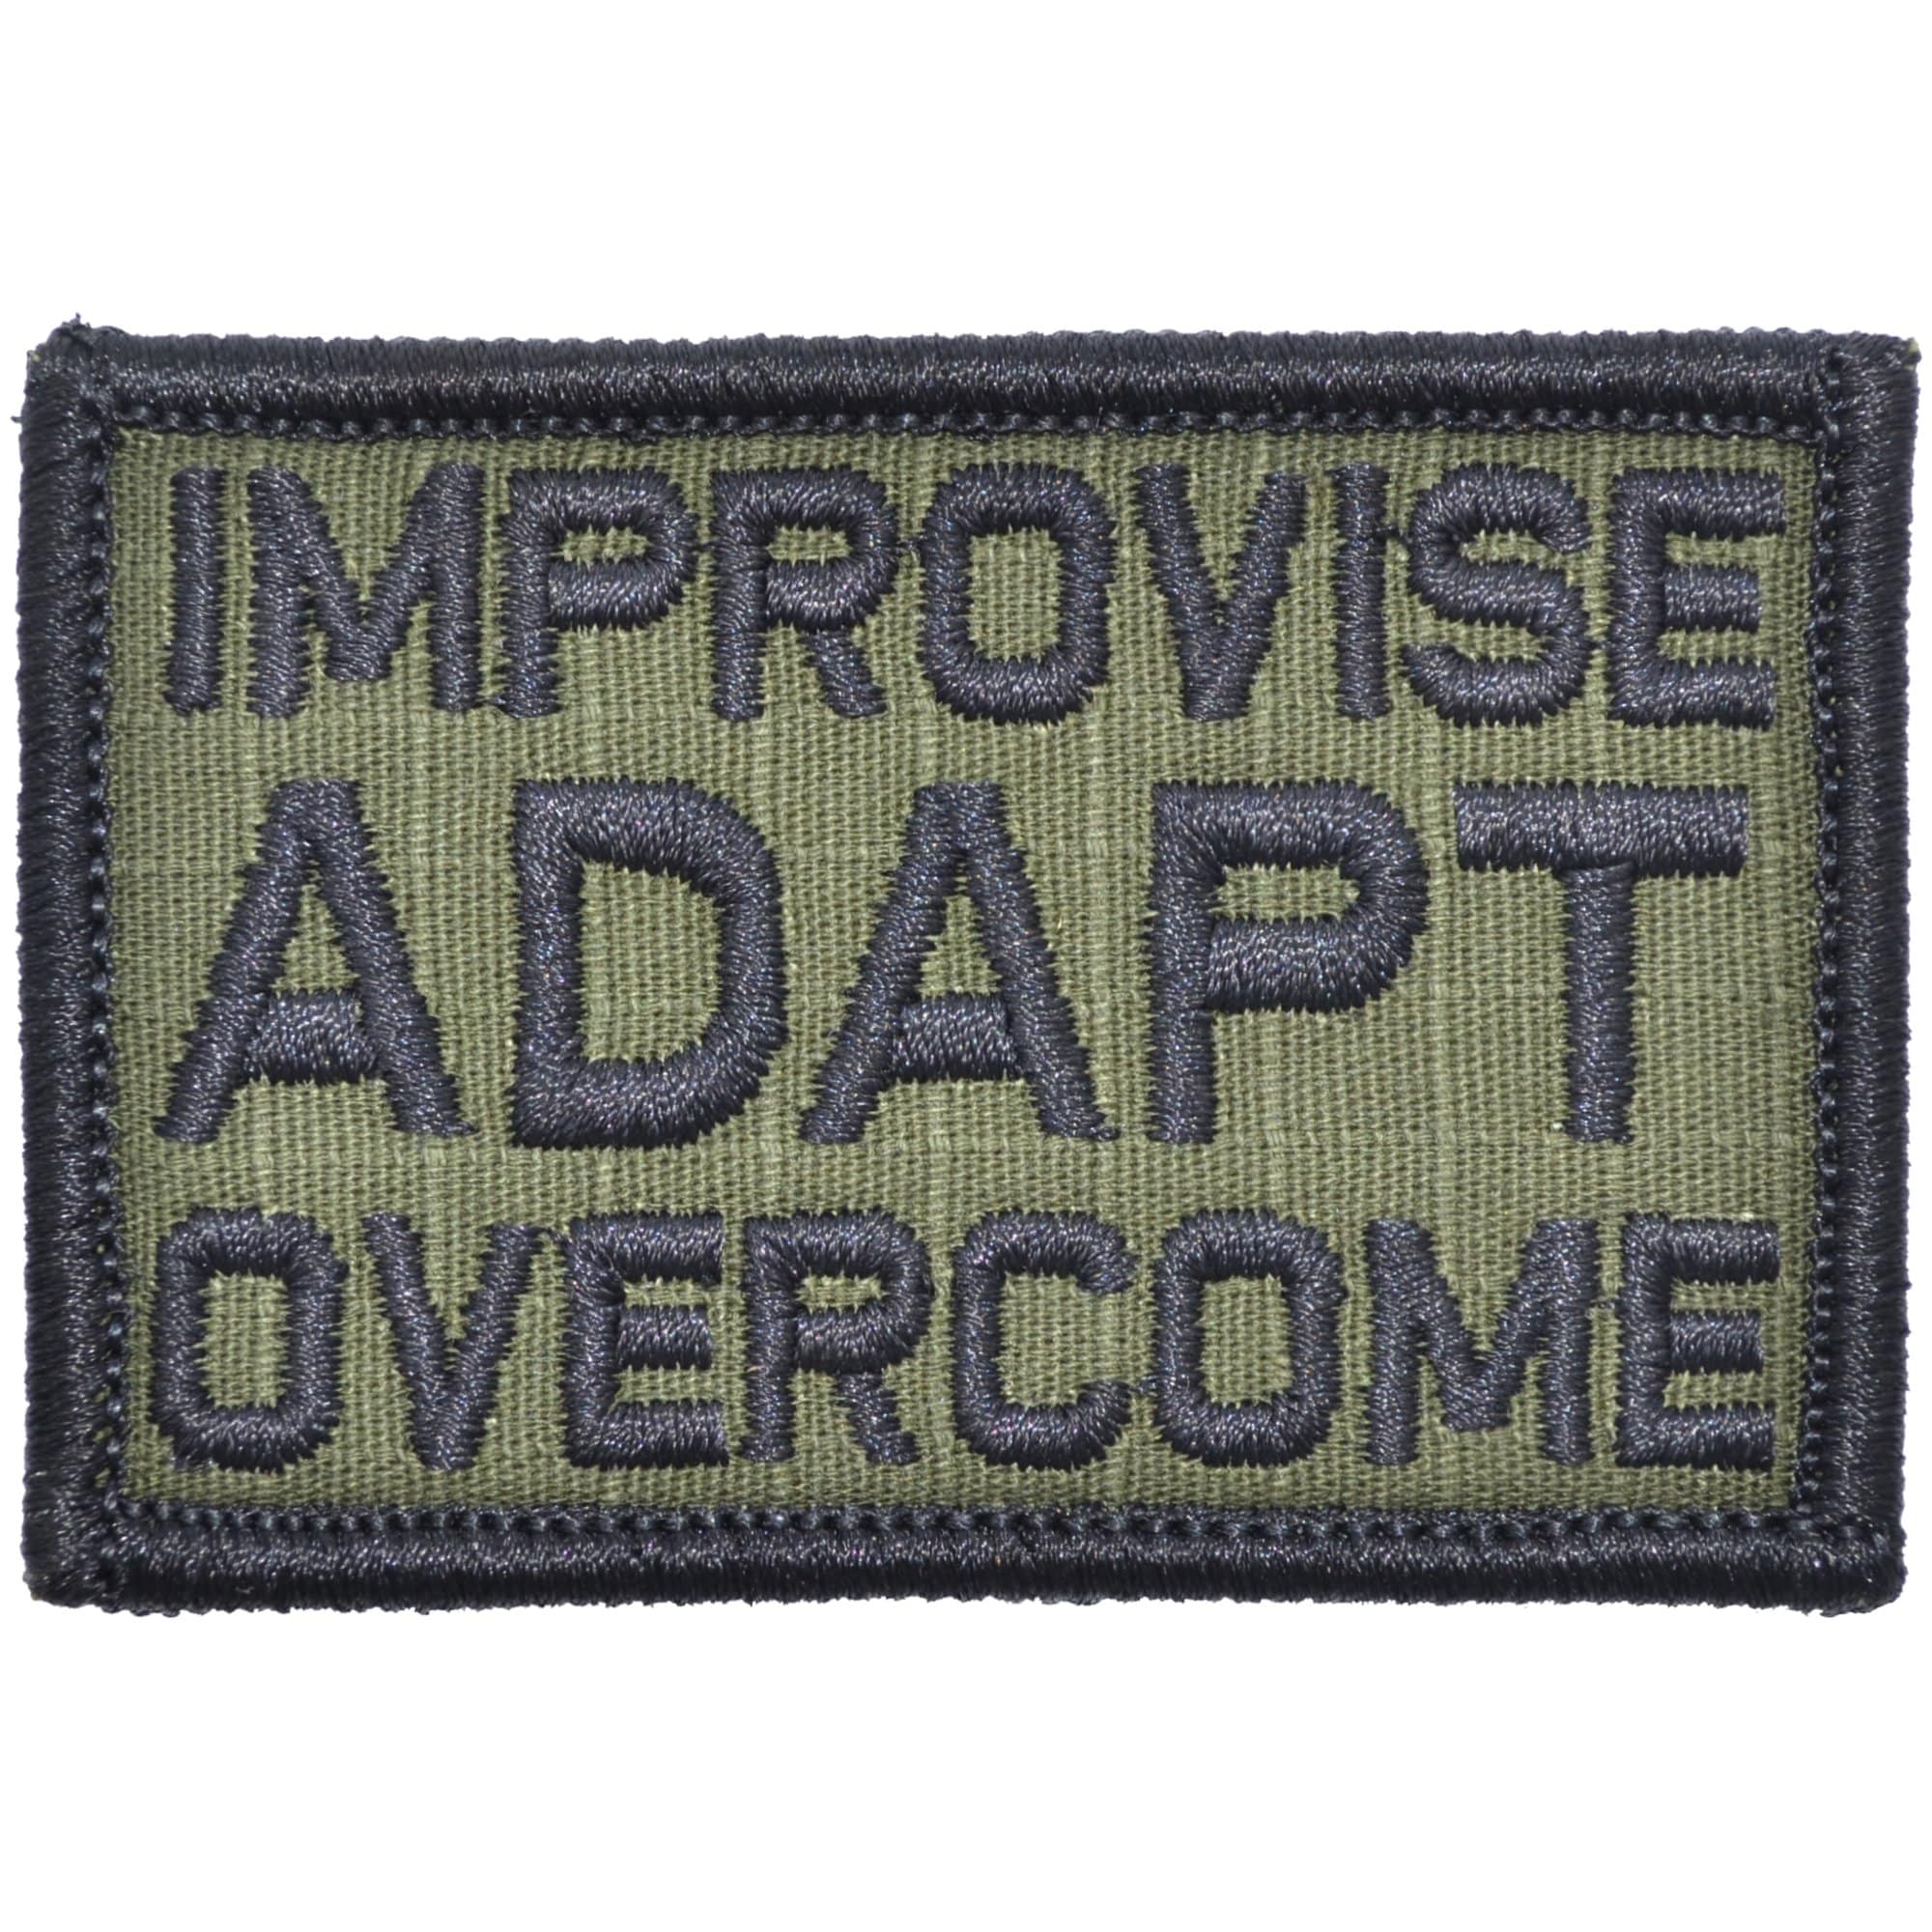 Tactical Gear Junkie Patches Olive Drab Improvise Adapt Overcome - 2x3 Patch